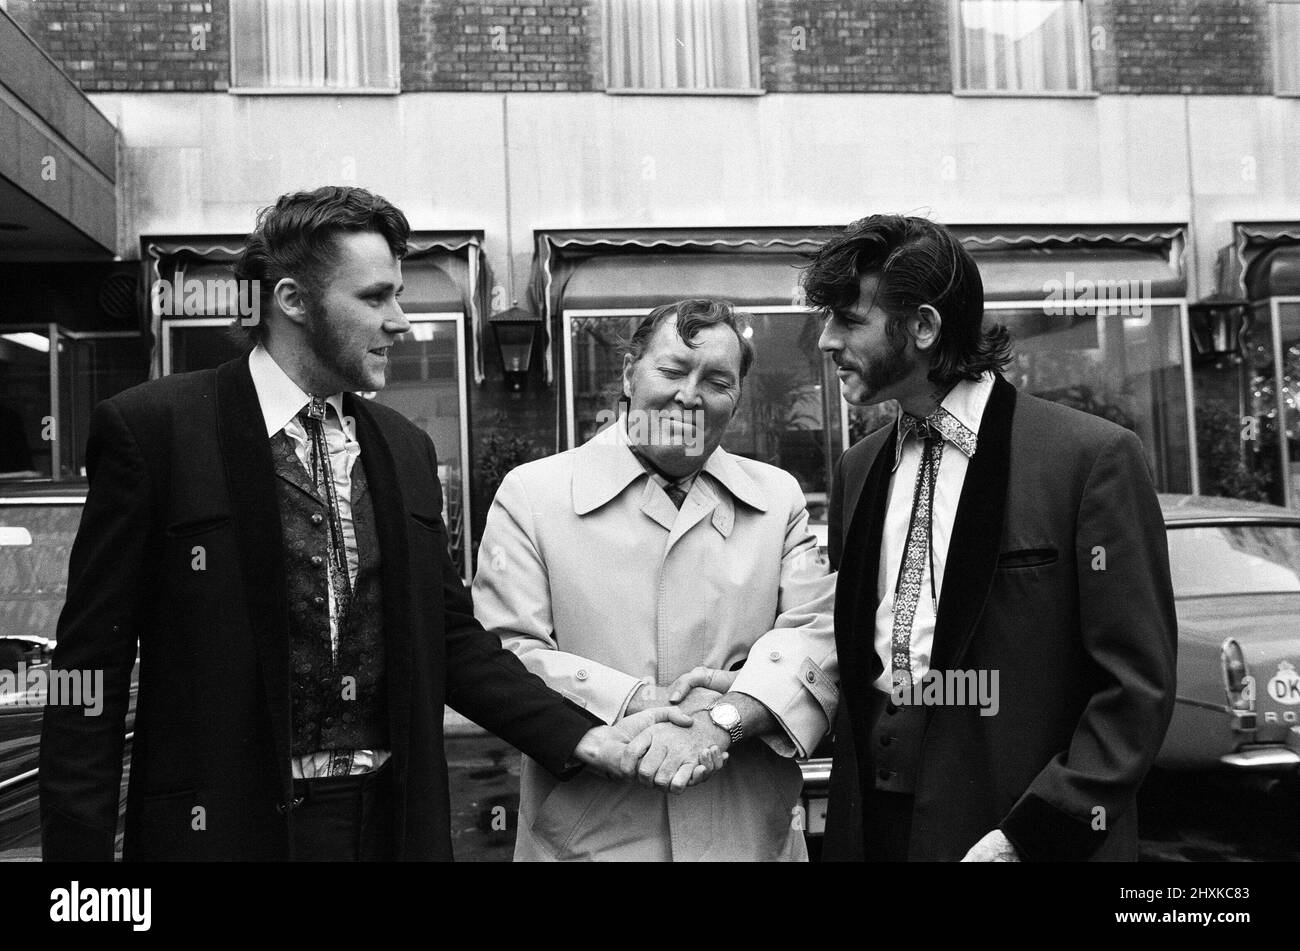 Two Teddy Boys suitably attired made an appointment with Bill Haley, King of Rock 'n' Roll. They apologised to him on behalf of rock fans after Haley's concert on Friday last week was wrecked by 'Plastics', the younger fans. 6th December 1976. Stock Photo